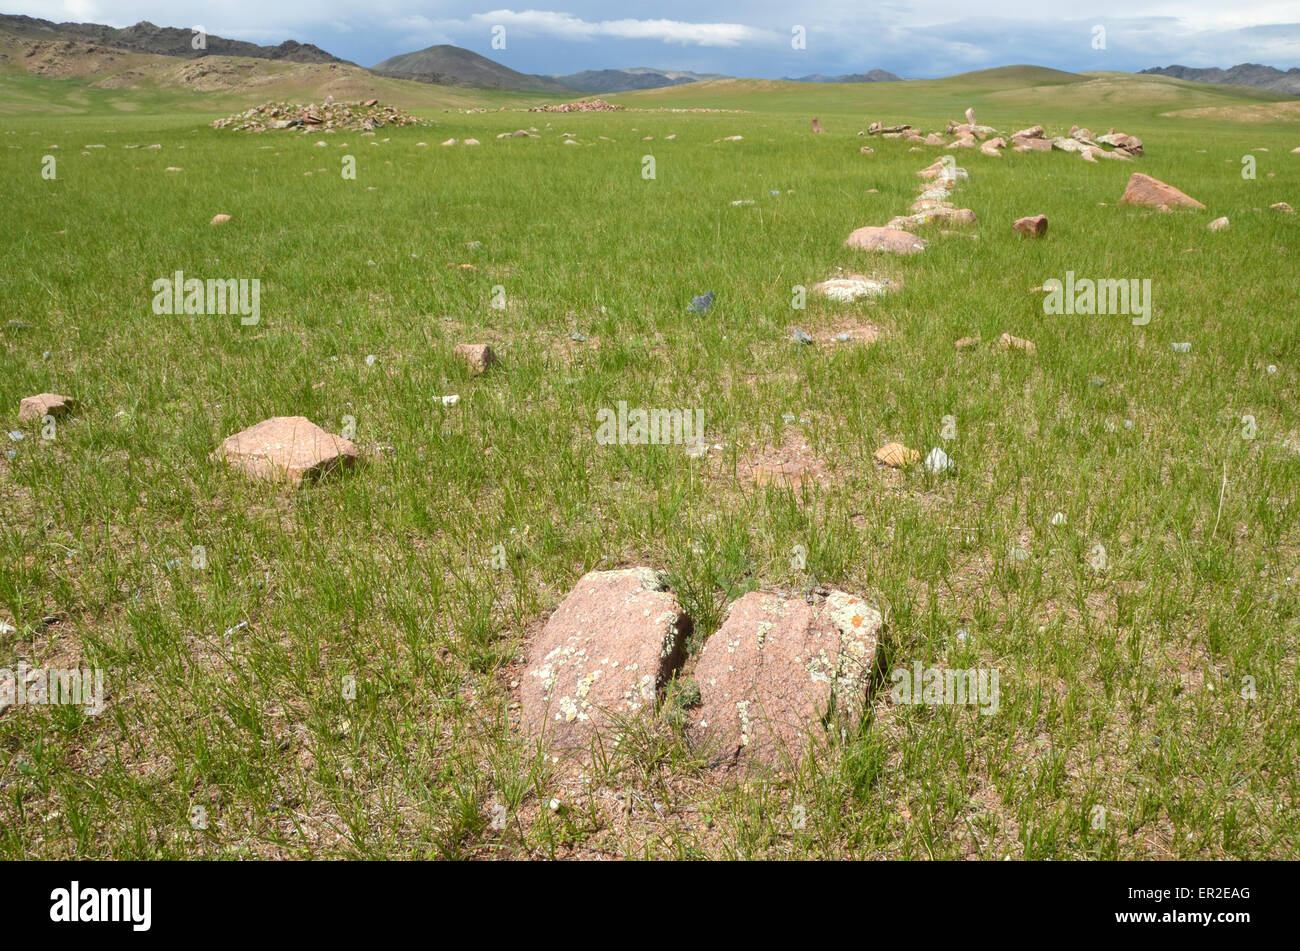 Burial mounds and stone alignment near the city of Moron, Ovsgol province, northern Mongolia. Stock Photo